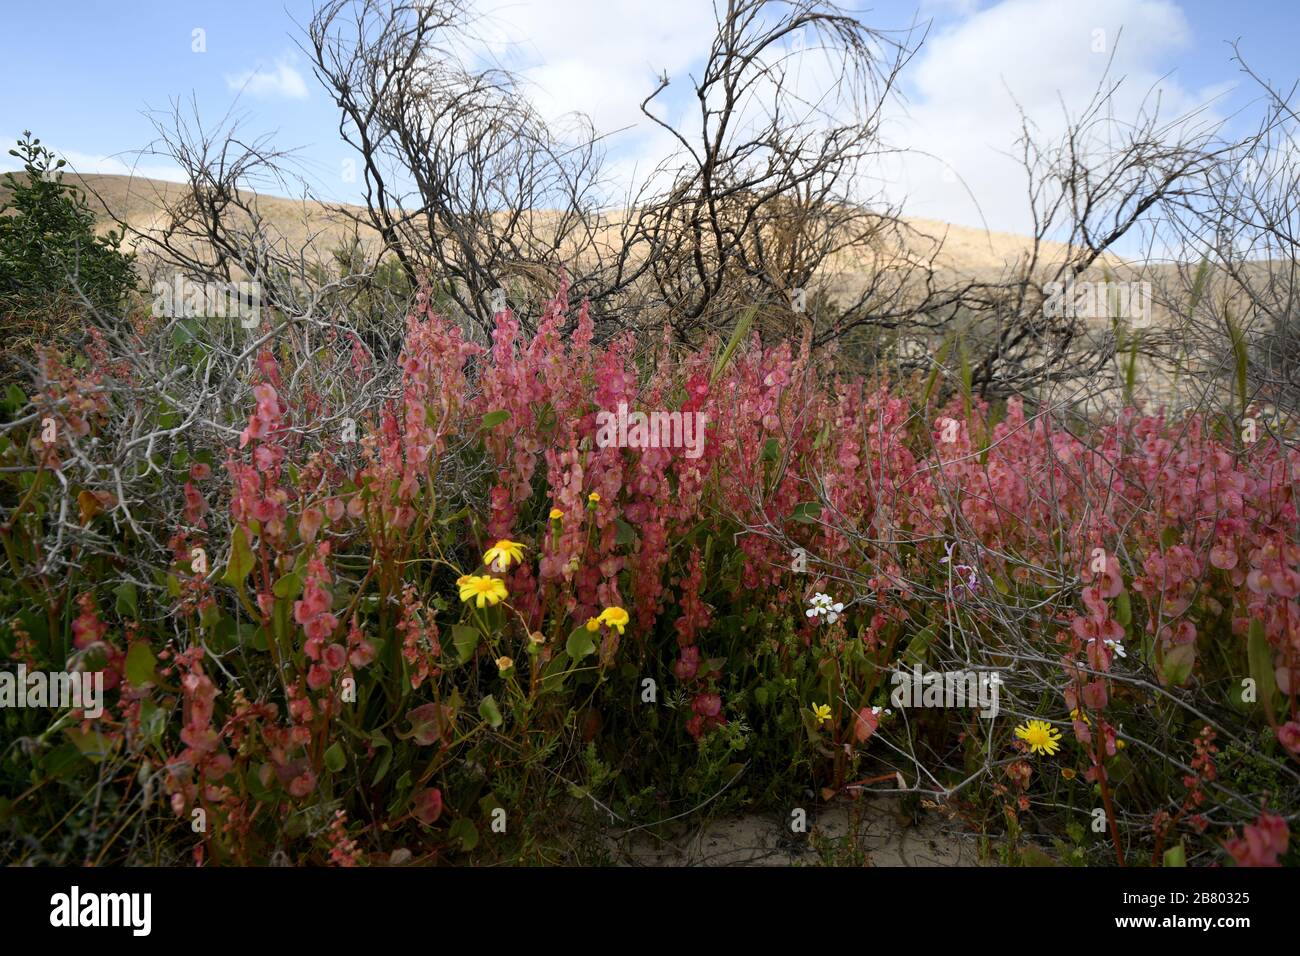 Blooming Knotweed sorrel (Rumex cyprius syn Rumex roseus). After a rare rainy season in the Negev Desert, Israel, an abundance of wildflowers sprout o Stock Photo